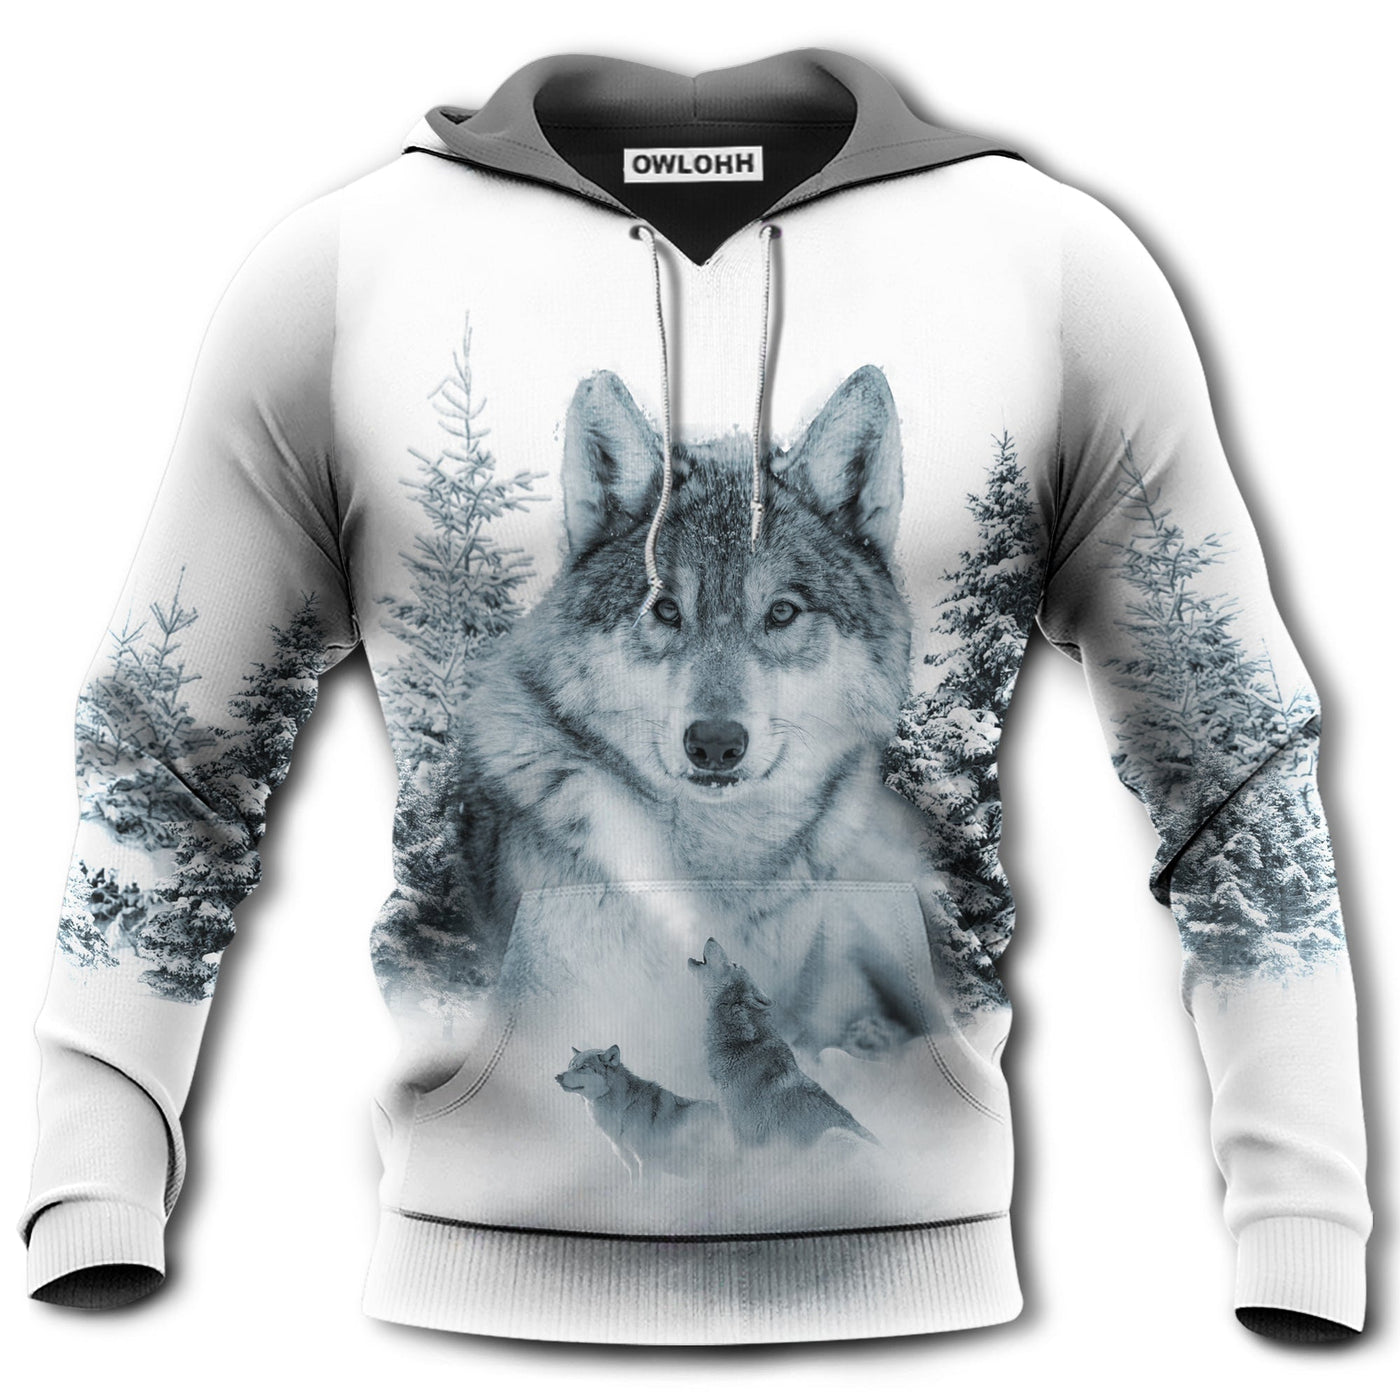 Unisex Hoodie / S Native Life Native American Culture Wolf In The Snow - Hoodie - Owls Matrix LTD